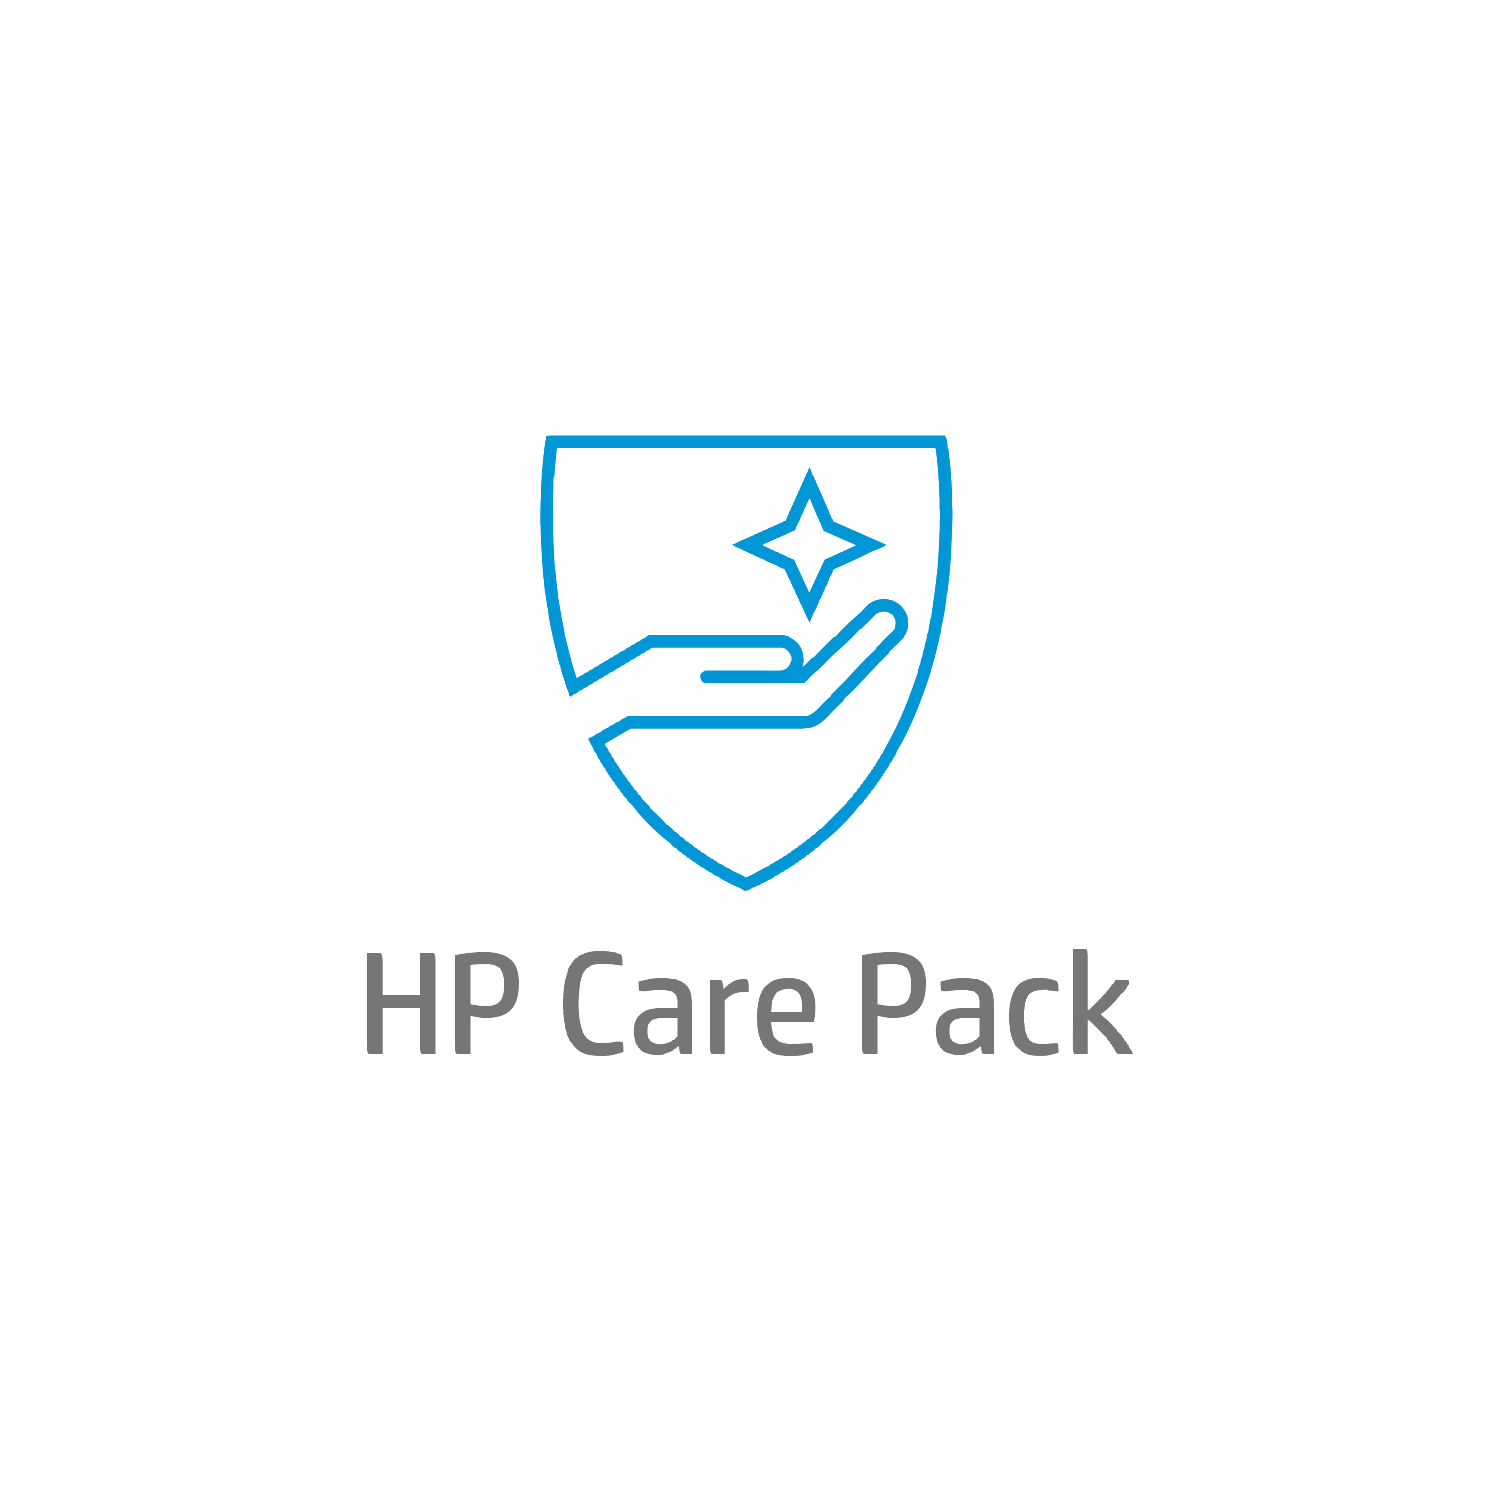 Bild von HP Electronic Care Pack Software Technical Support